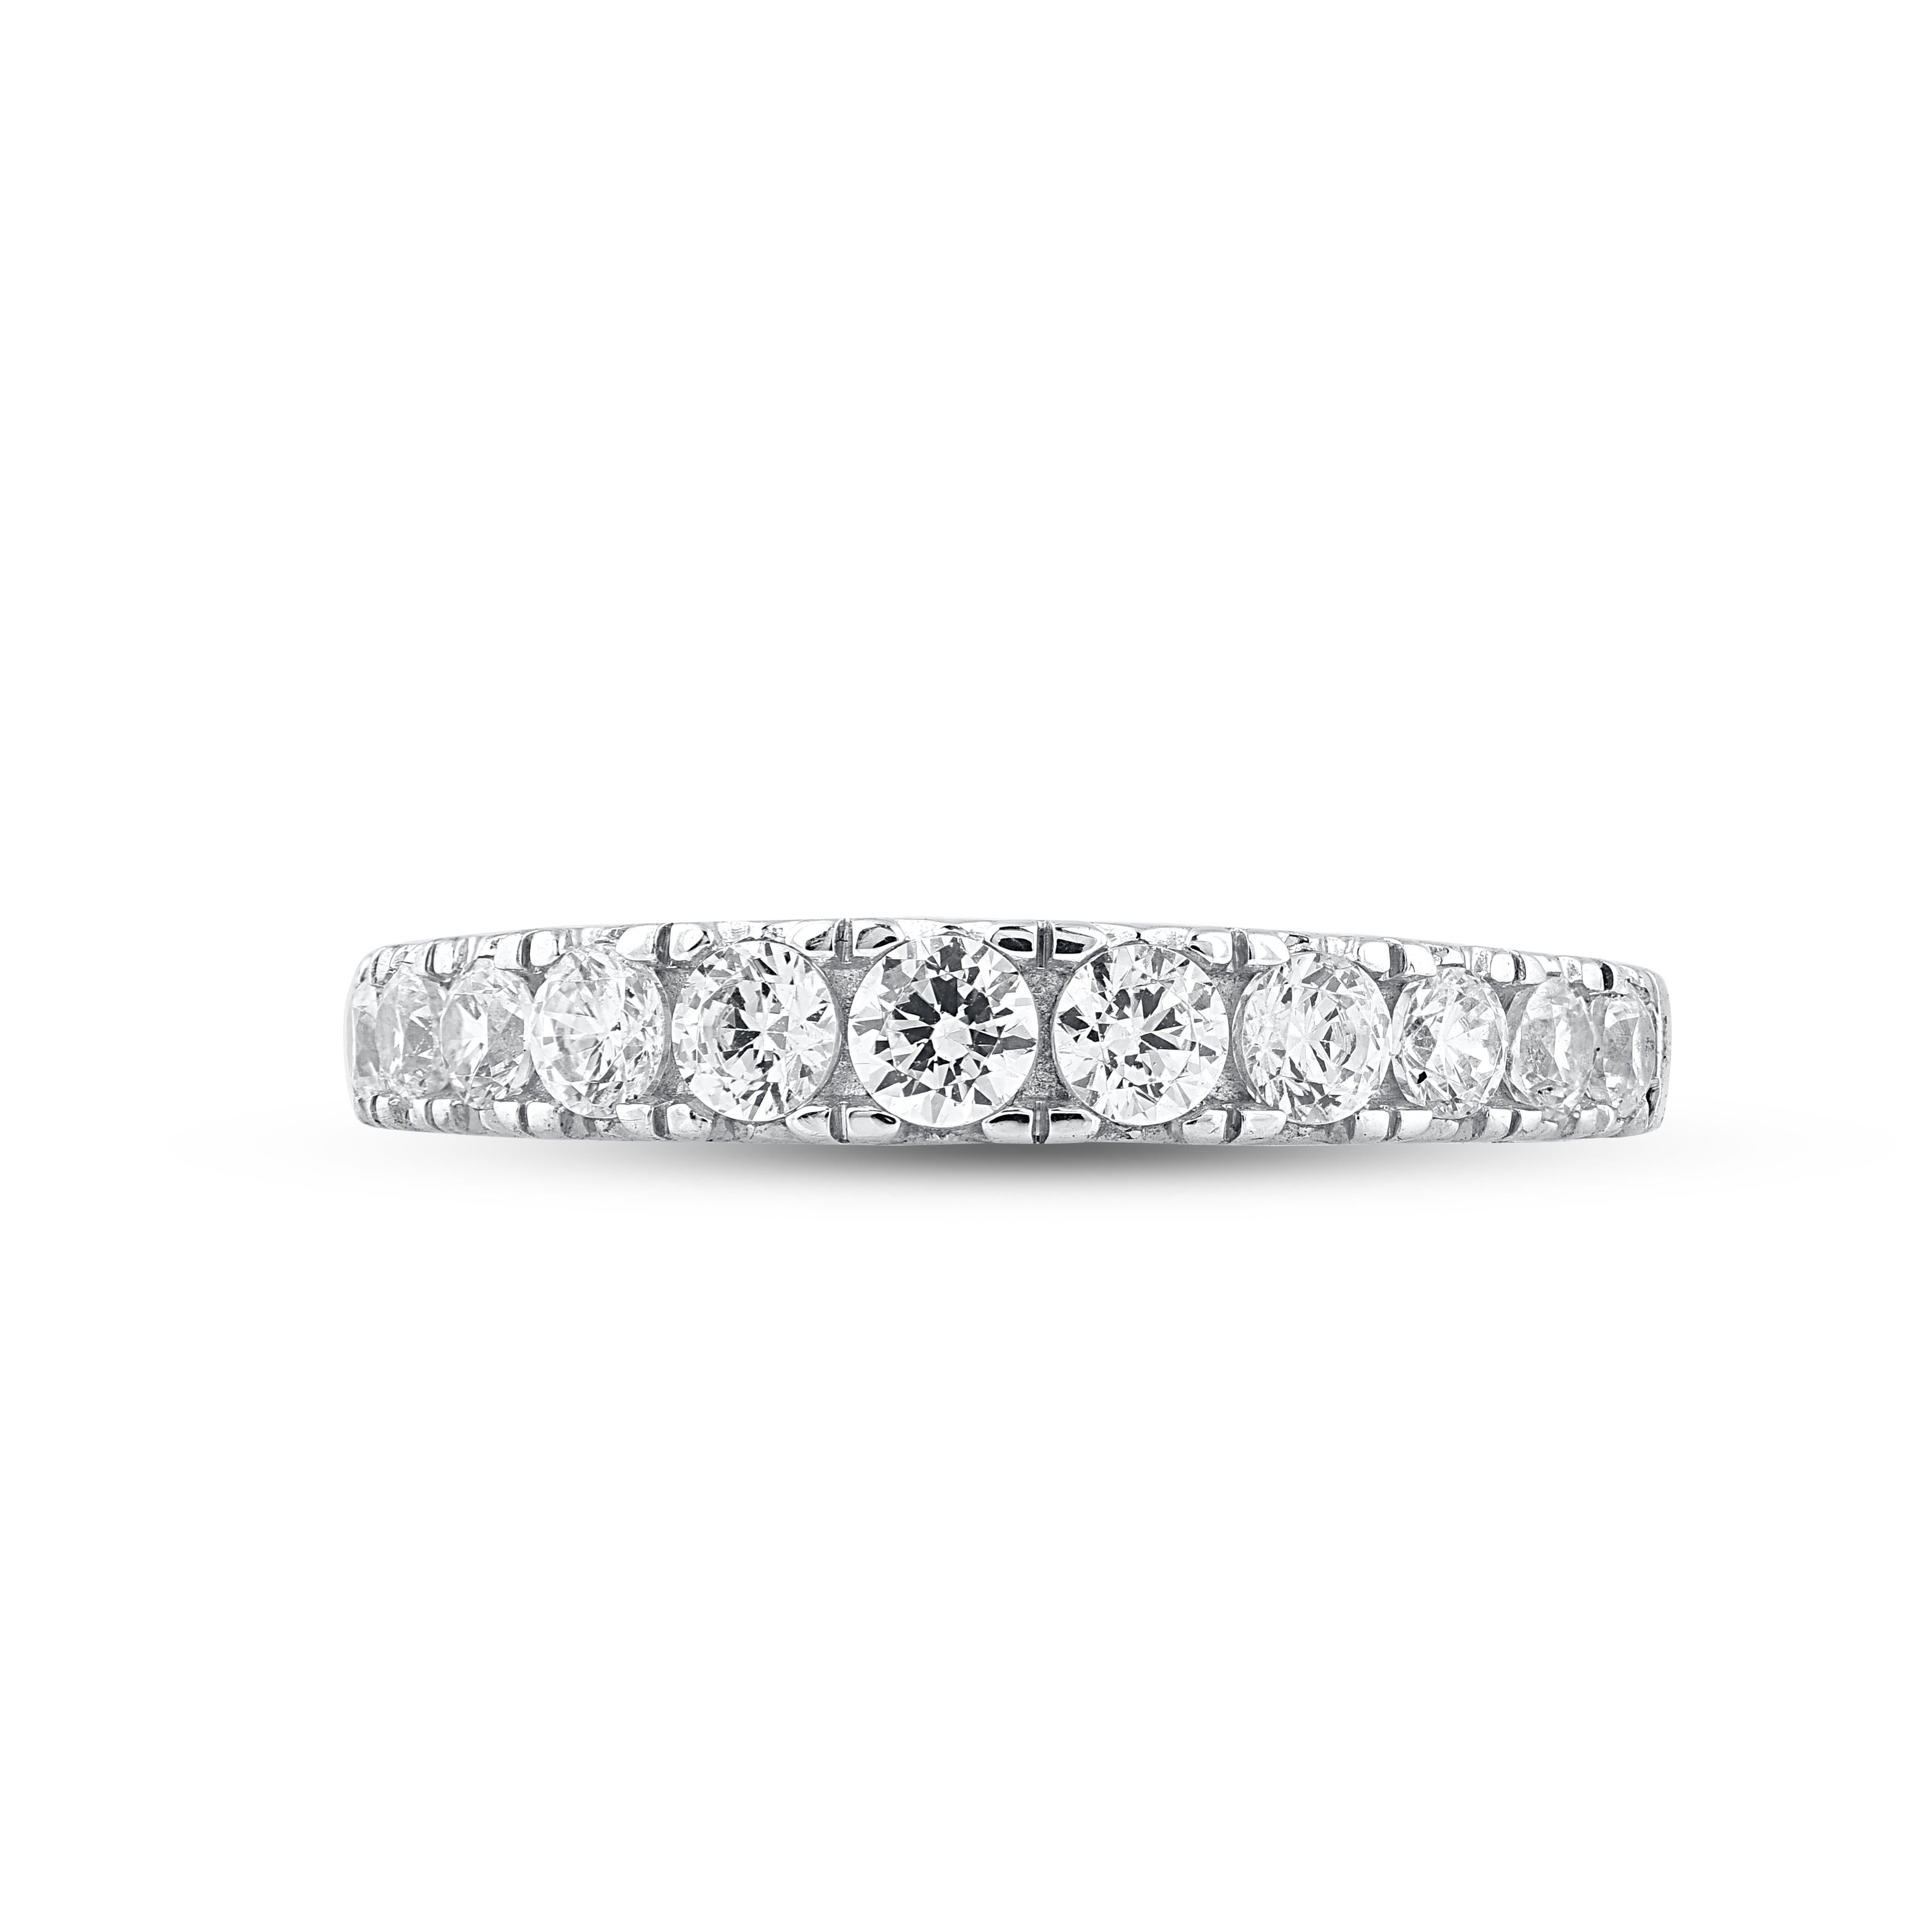 Stunning and classic, this diamond stackable diamond engagement band is crafted in 14K white gold. This engagement band ring is studded with sparkling 11 round white diamonds in secured french setting. The diamonds are natural, not-treated and